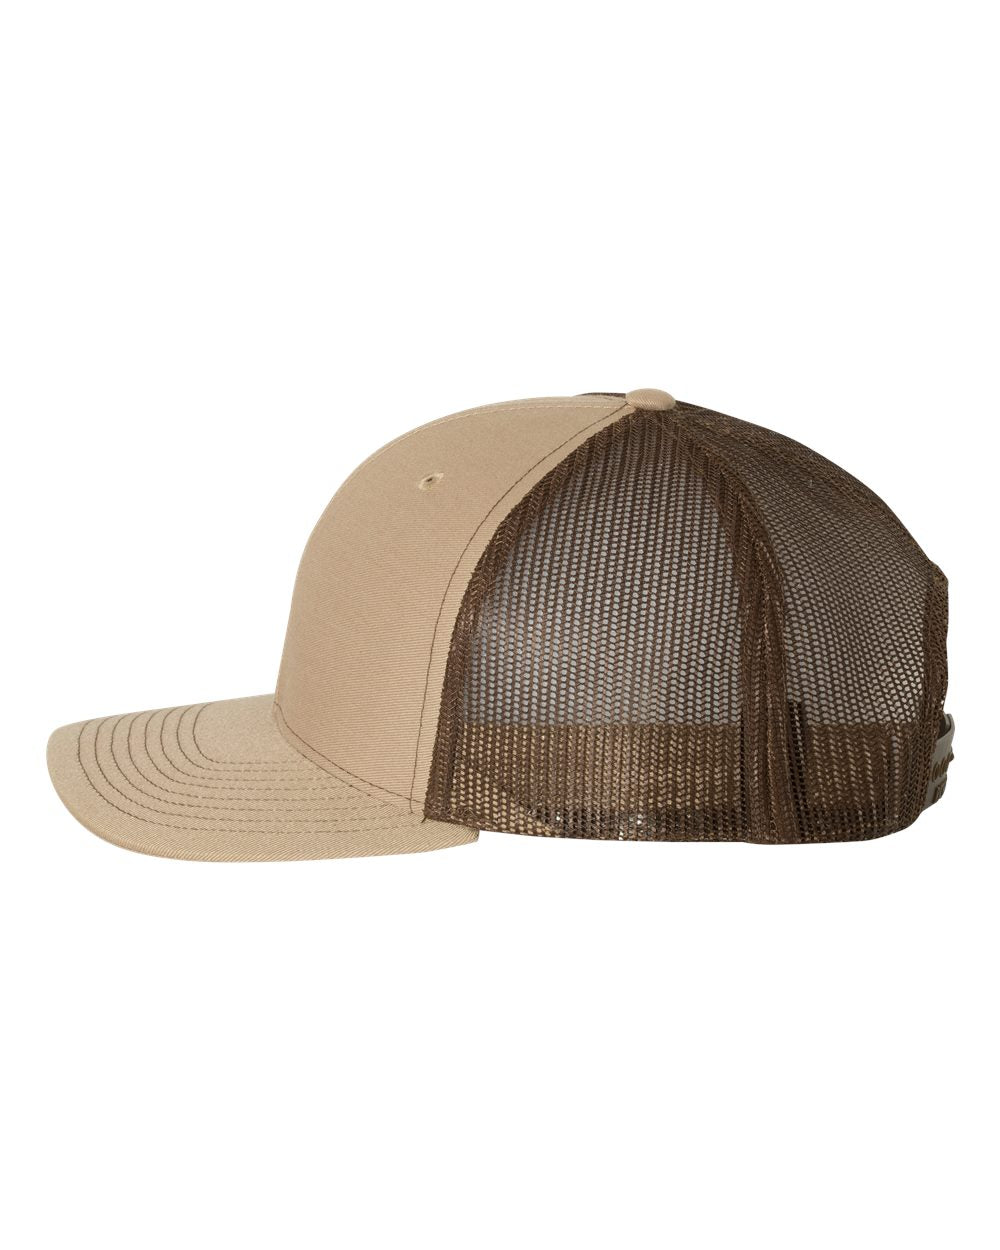 Image of the Kelly Hughes Stateline ID Richardson Cap with a dark brown patch, featuring the band's logo and an integrated ID slot, perfect for showcasing style and convenience at events with durable construction and a comfortable fit.